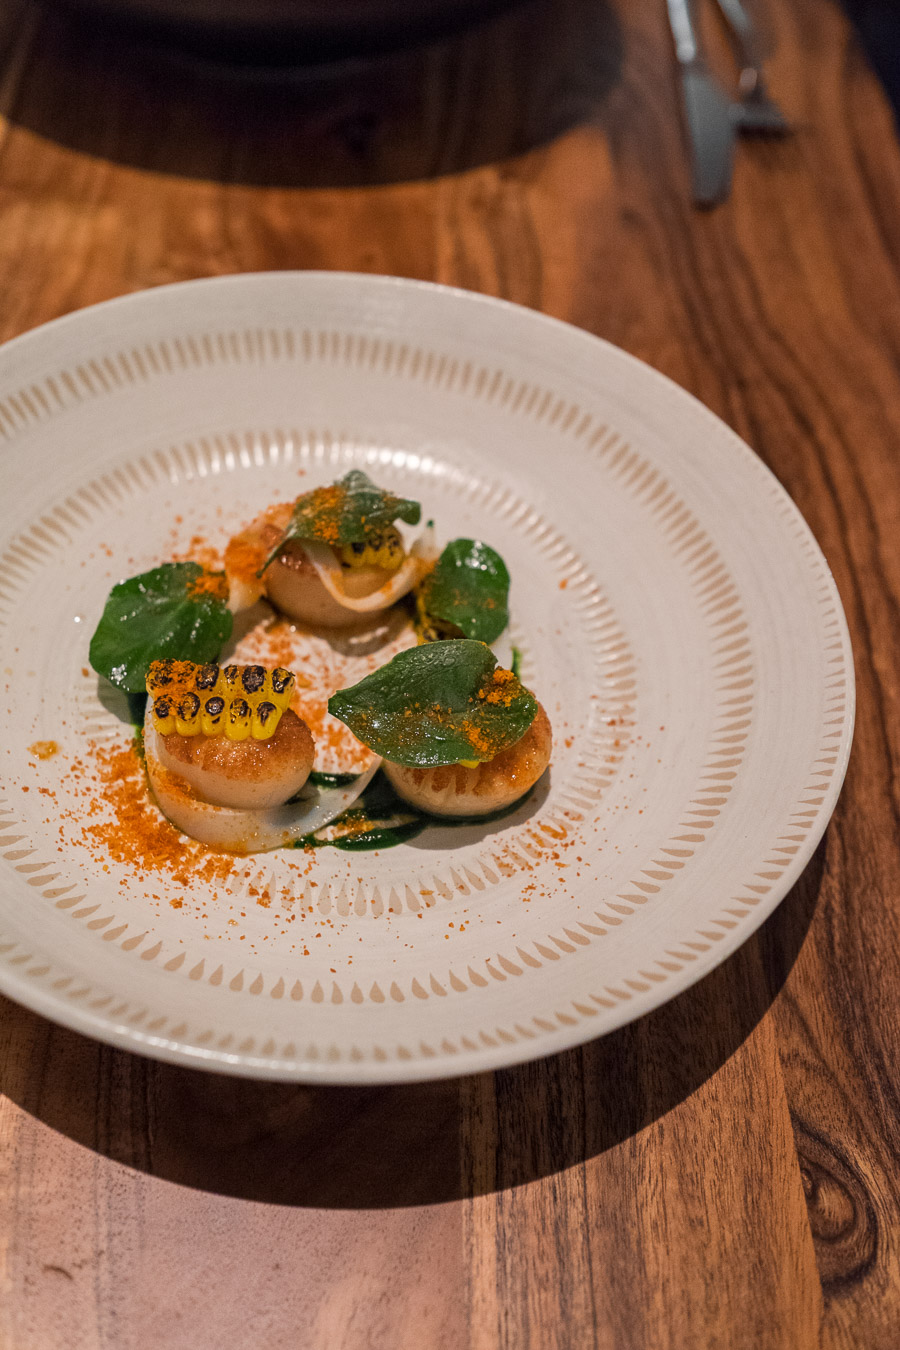 Scallops, corn, spinach + shaved squid